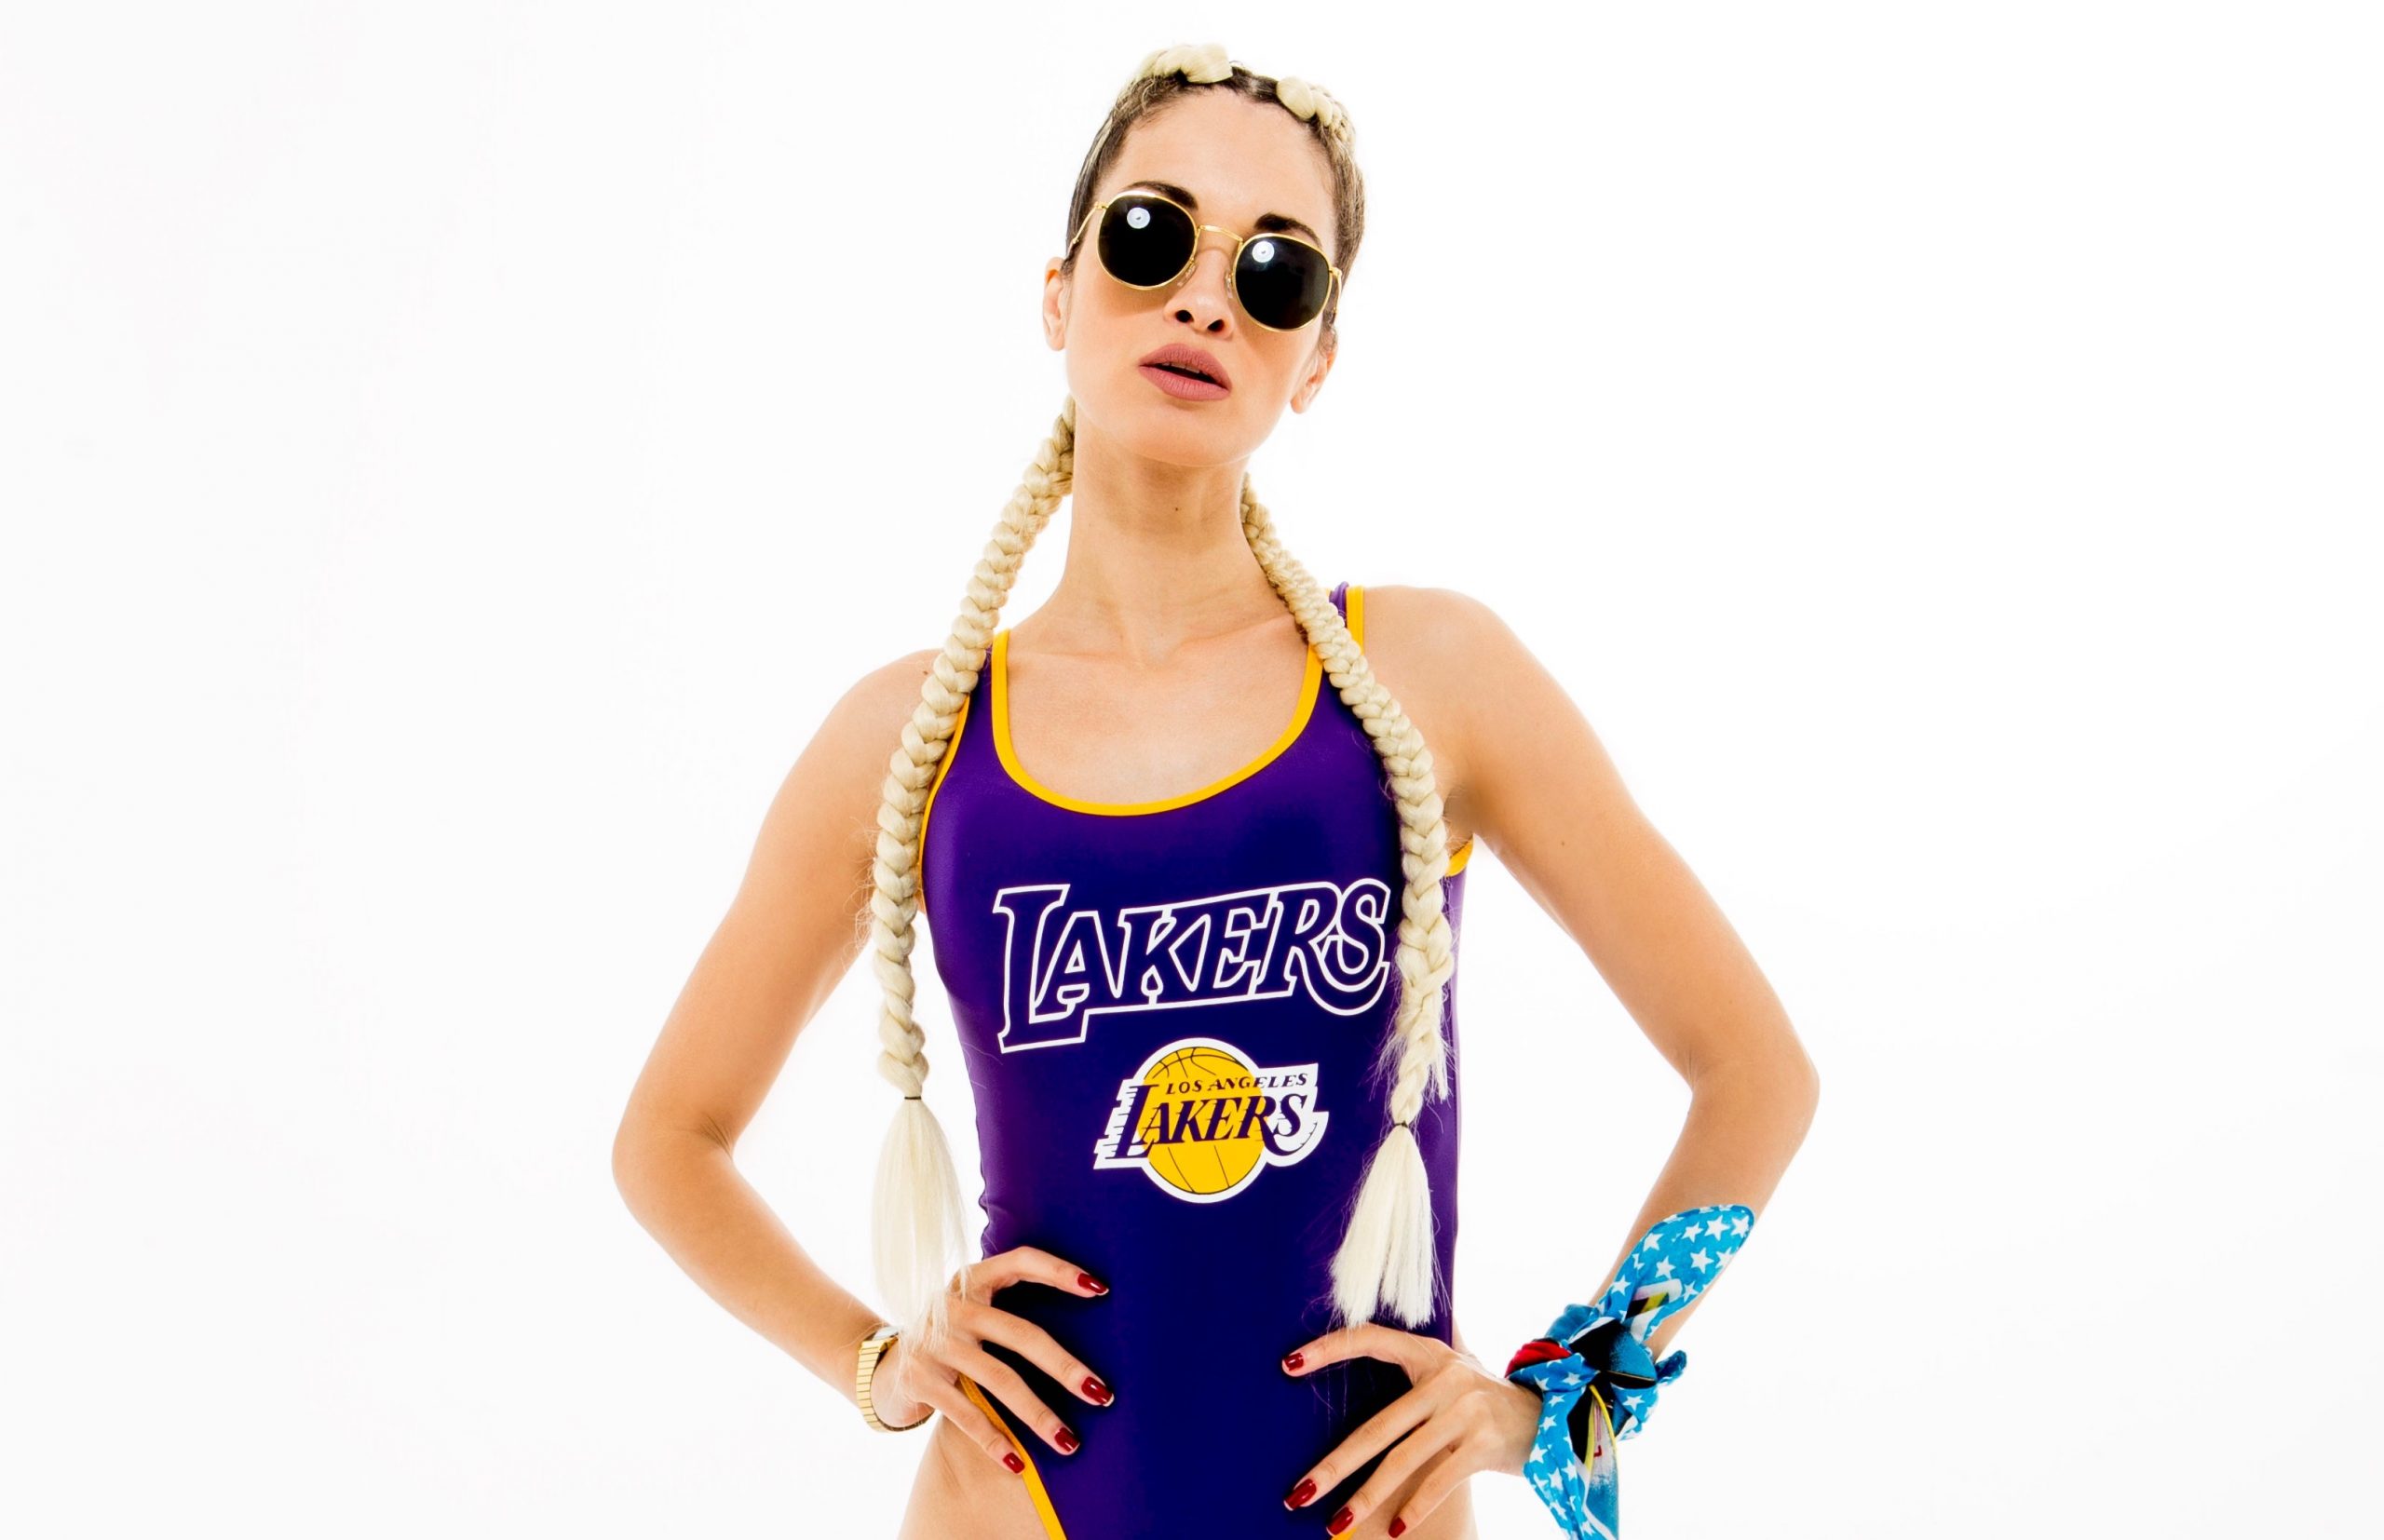 Courtside Chic: 7 Baller Styles To Rock While Cheering On The LA Lakers